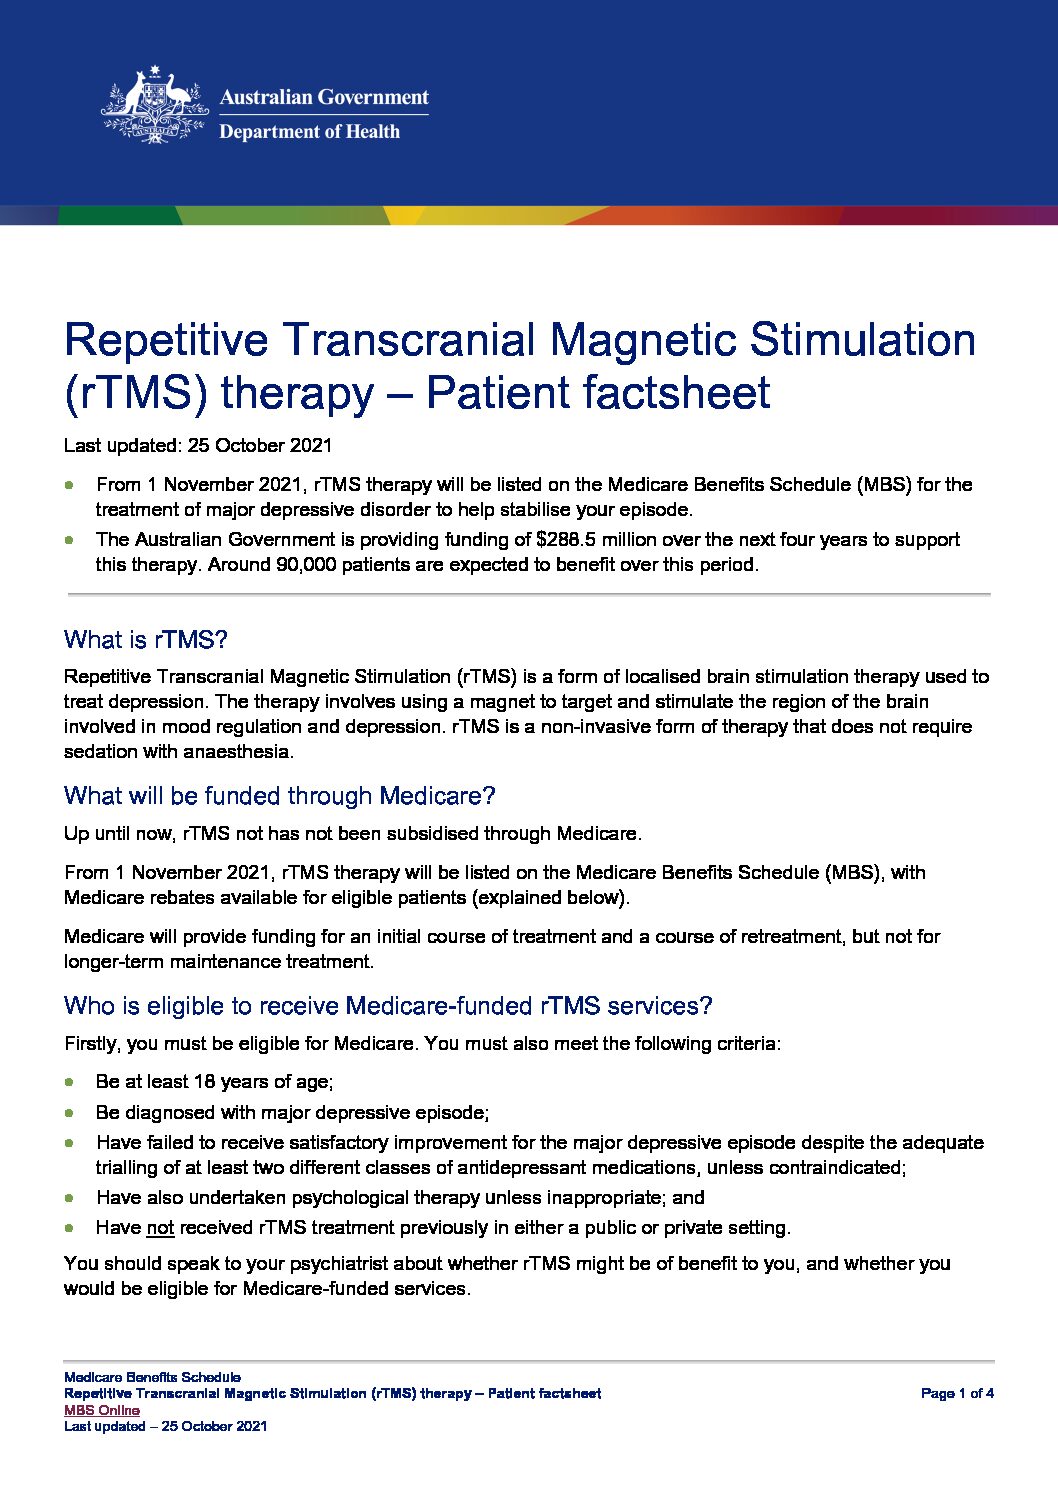 medicare-and-tms-treatment-fact-sheet-sydney-tms